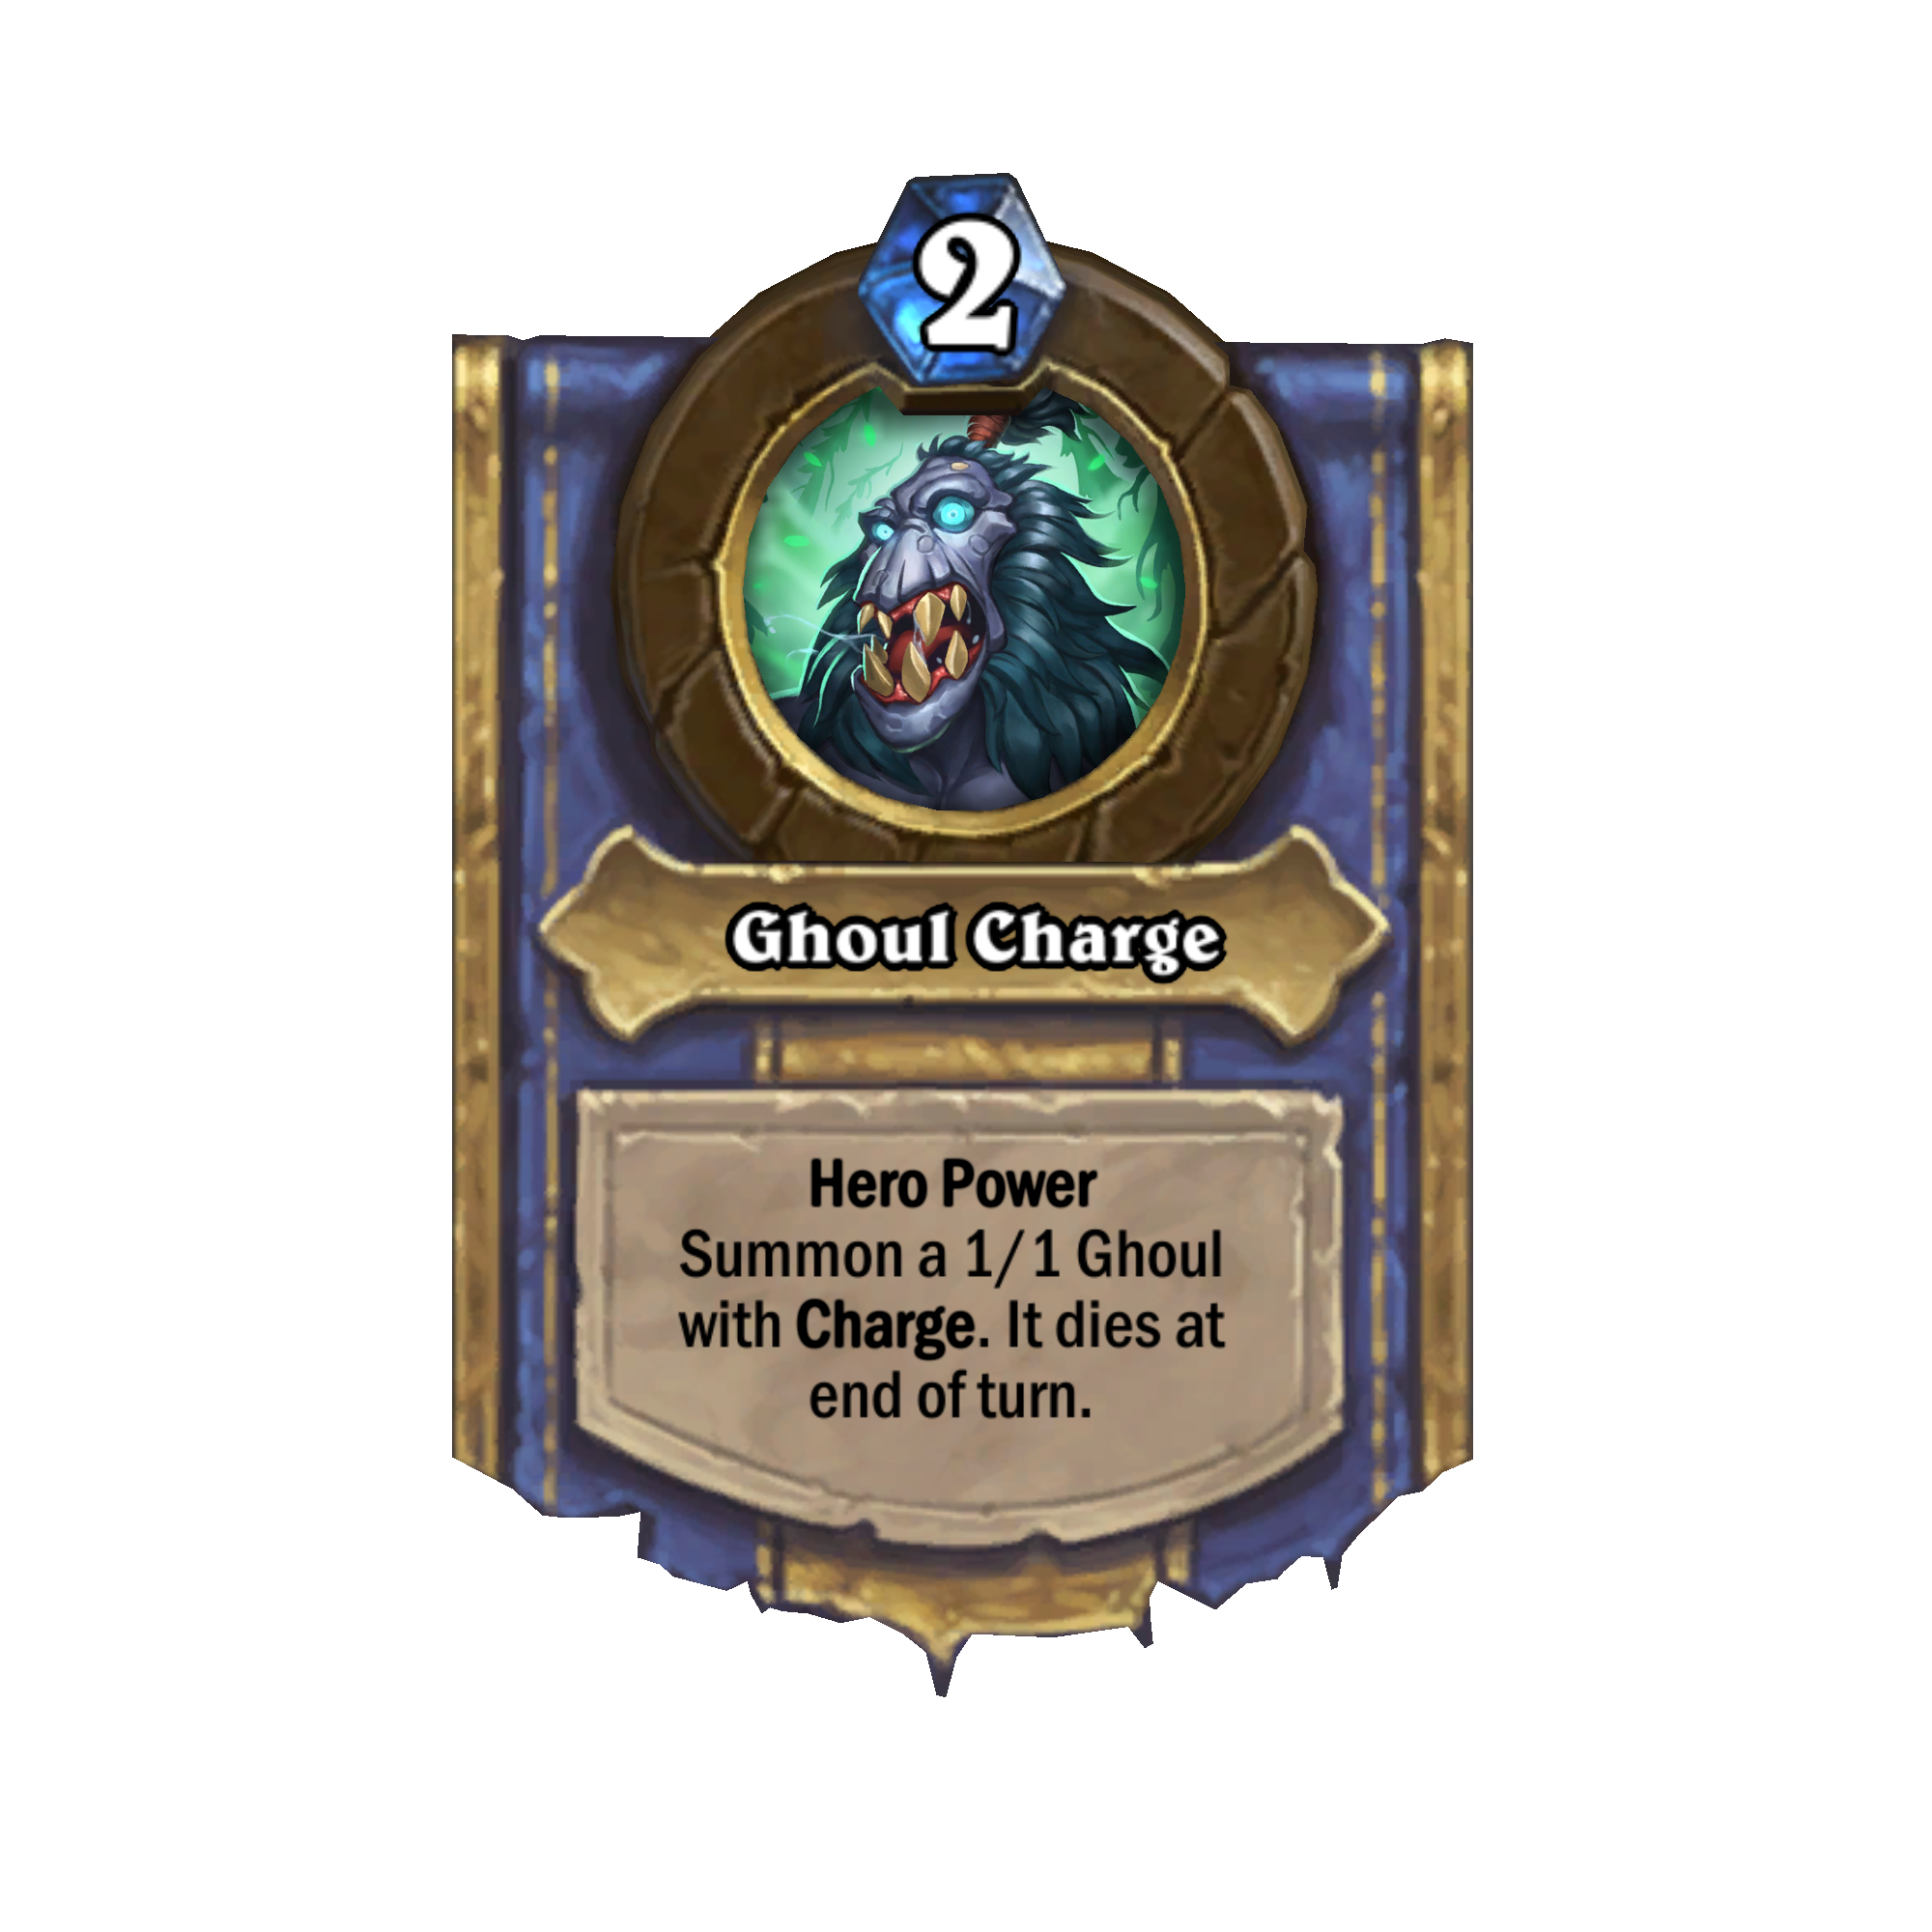 GhoulCharge